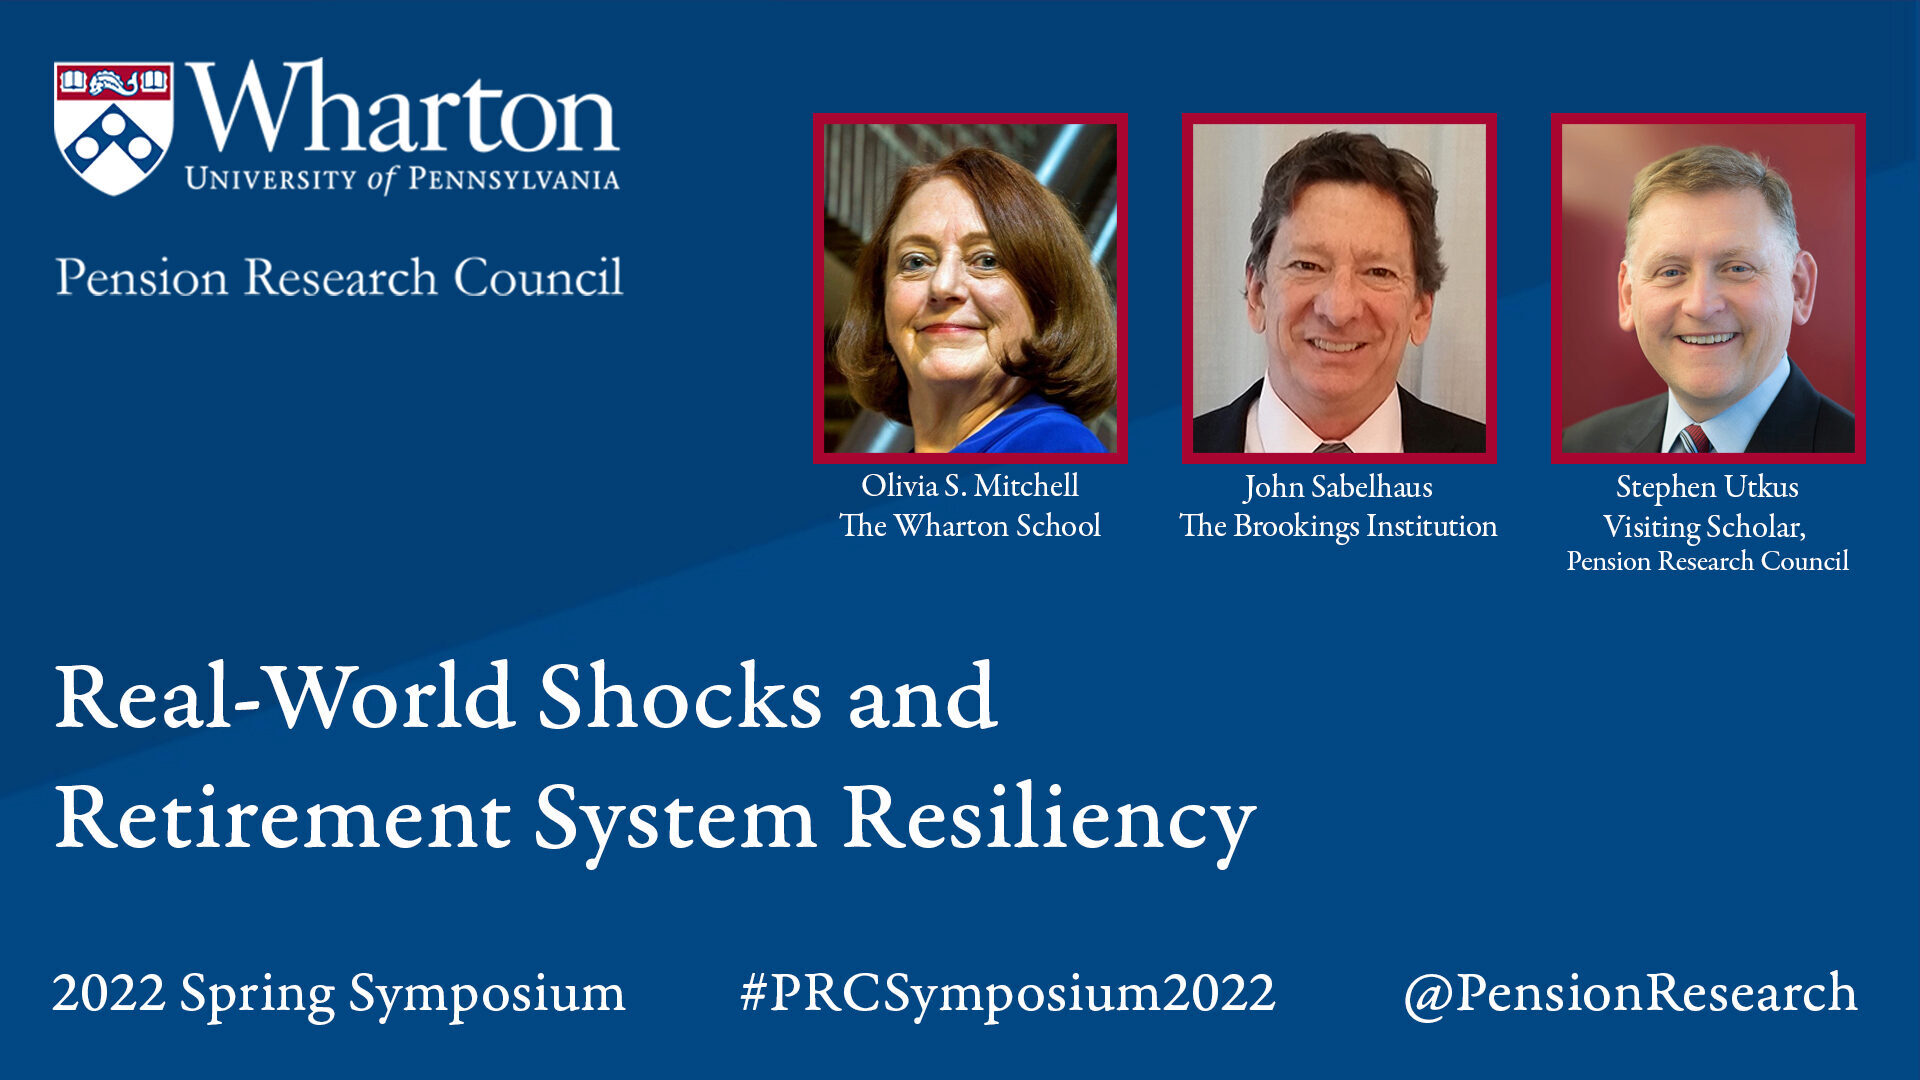 The Pension Research Council’s 2022 Symposium, “Real-World Shocks and Retirement System Resiliency” was held April 28-29, 2022. The conference was co-hosted by John Sabelhaus, the Brookings Institute, Stephen Utkus, current Visiting Scholar, Pension Research Council, and Wharton Prof. Olivia S. Mitchell. This was the third time the conference was held online. Here are some of the highlights from the event.